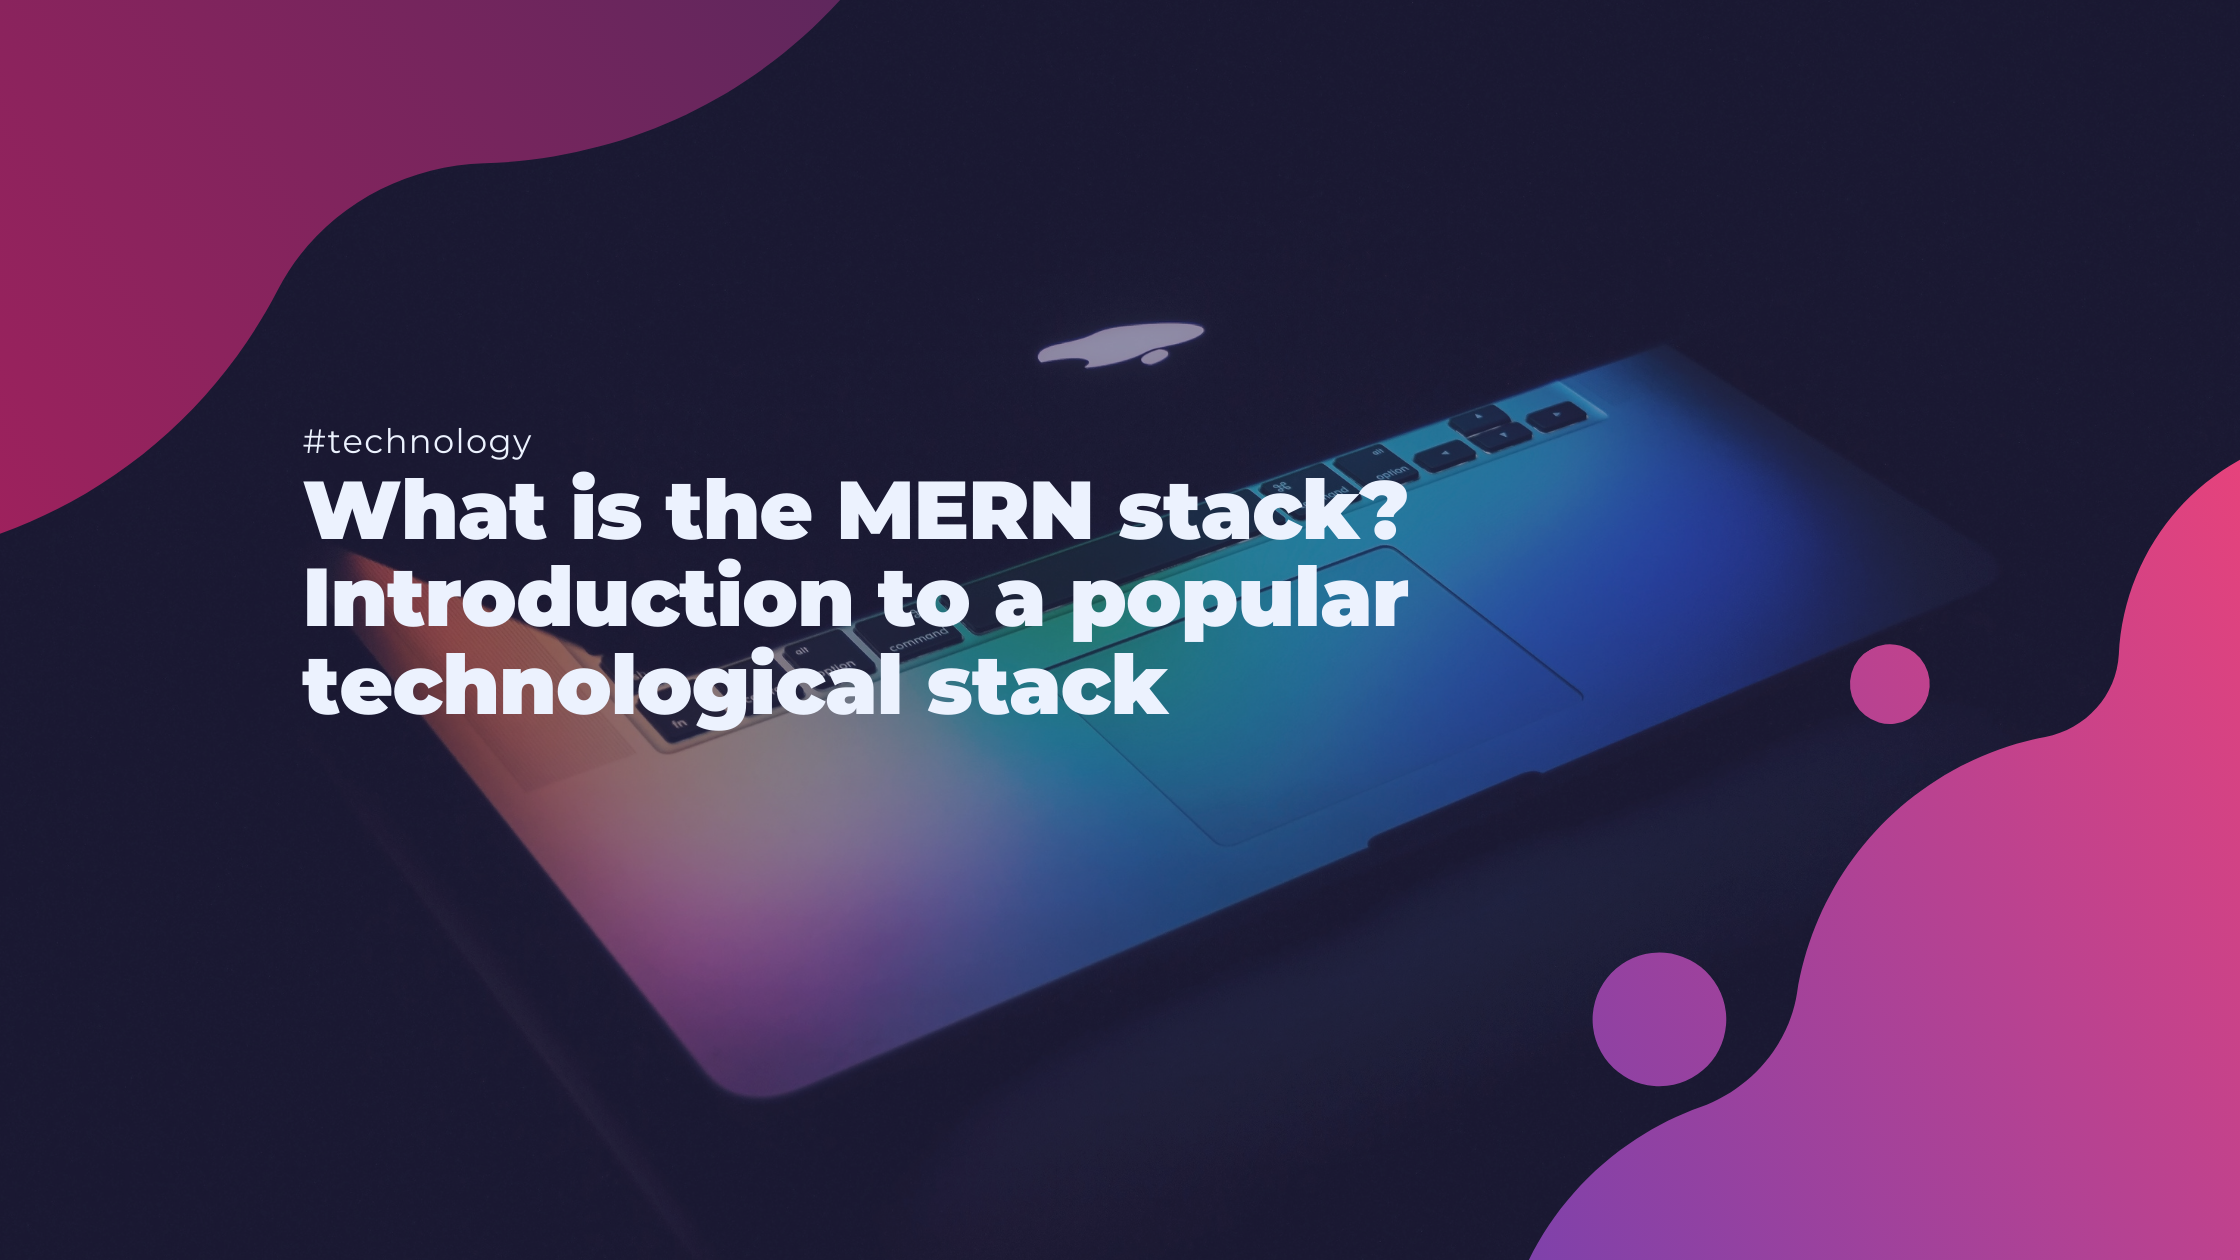 What is the MERN stack? Introduction to a popular technological stack